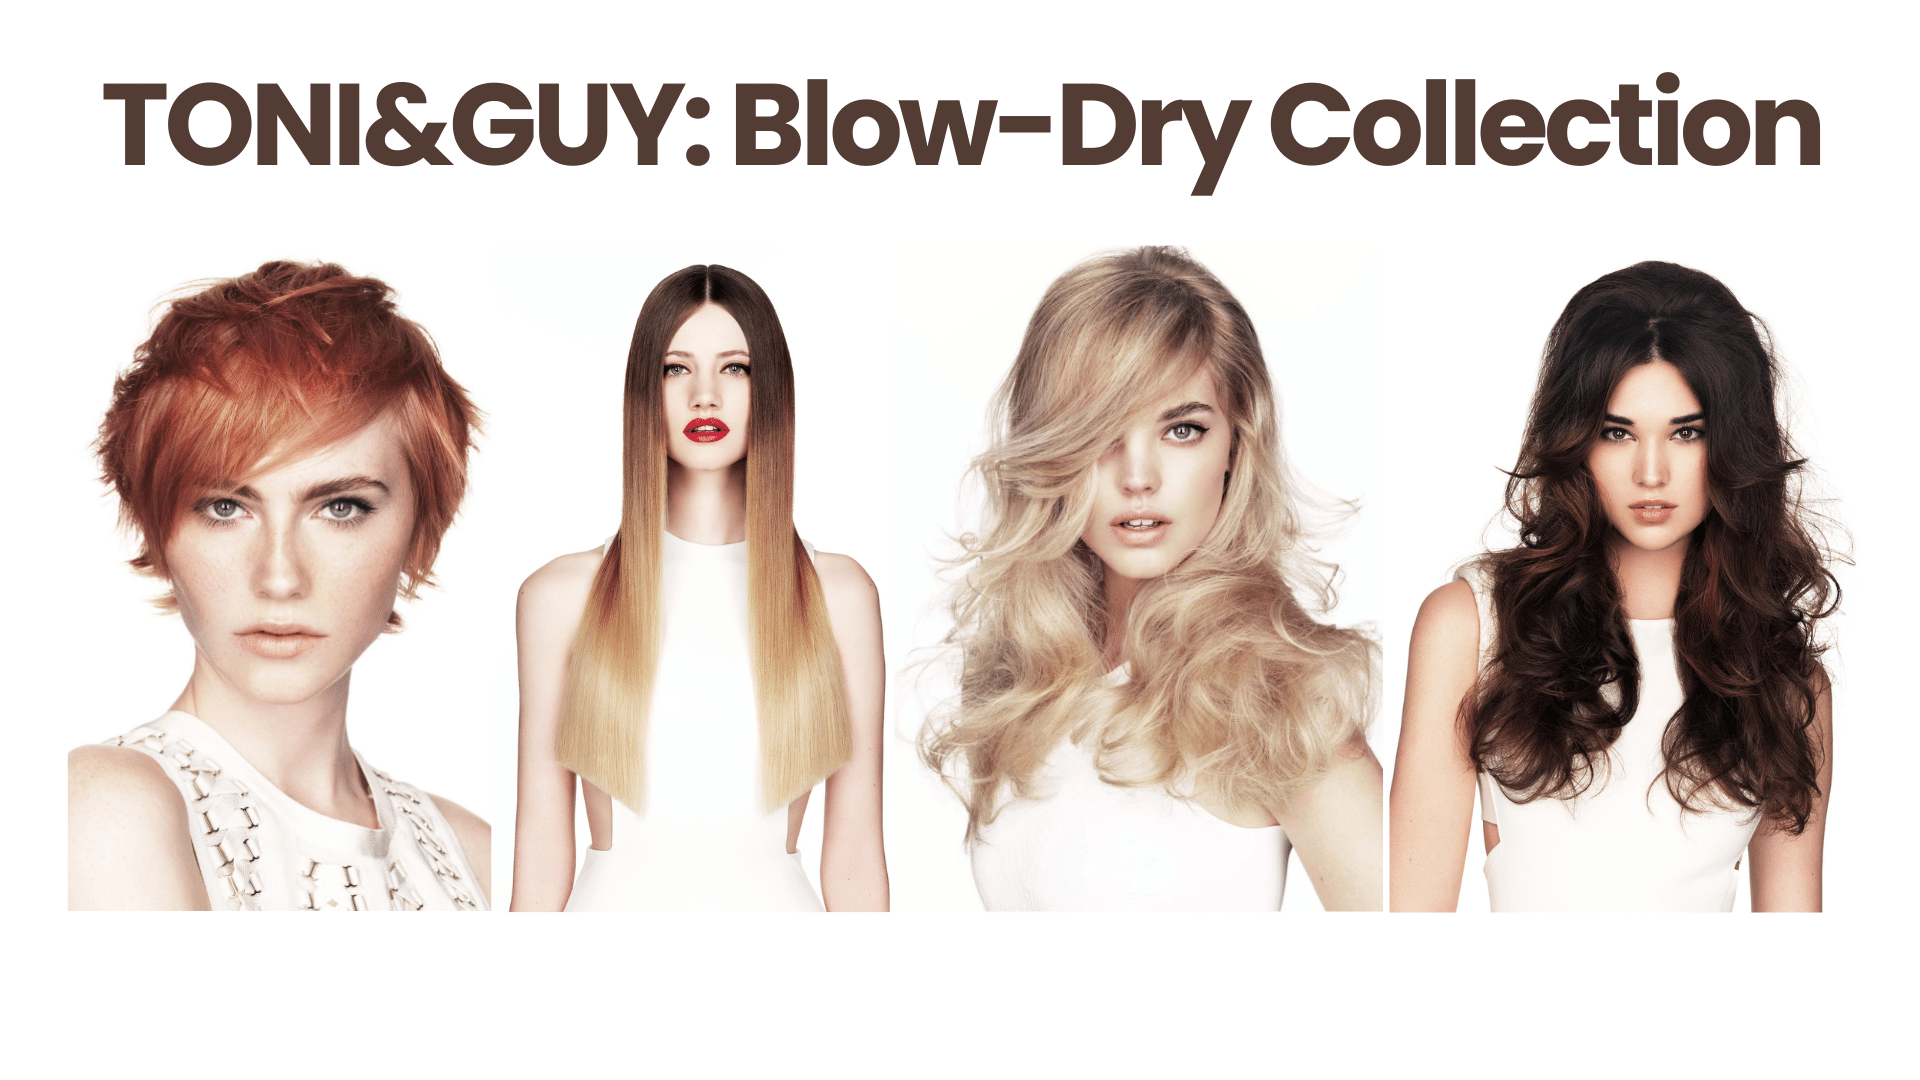 TONI&GUY: Blow Dry Collection